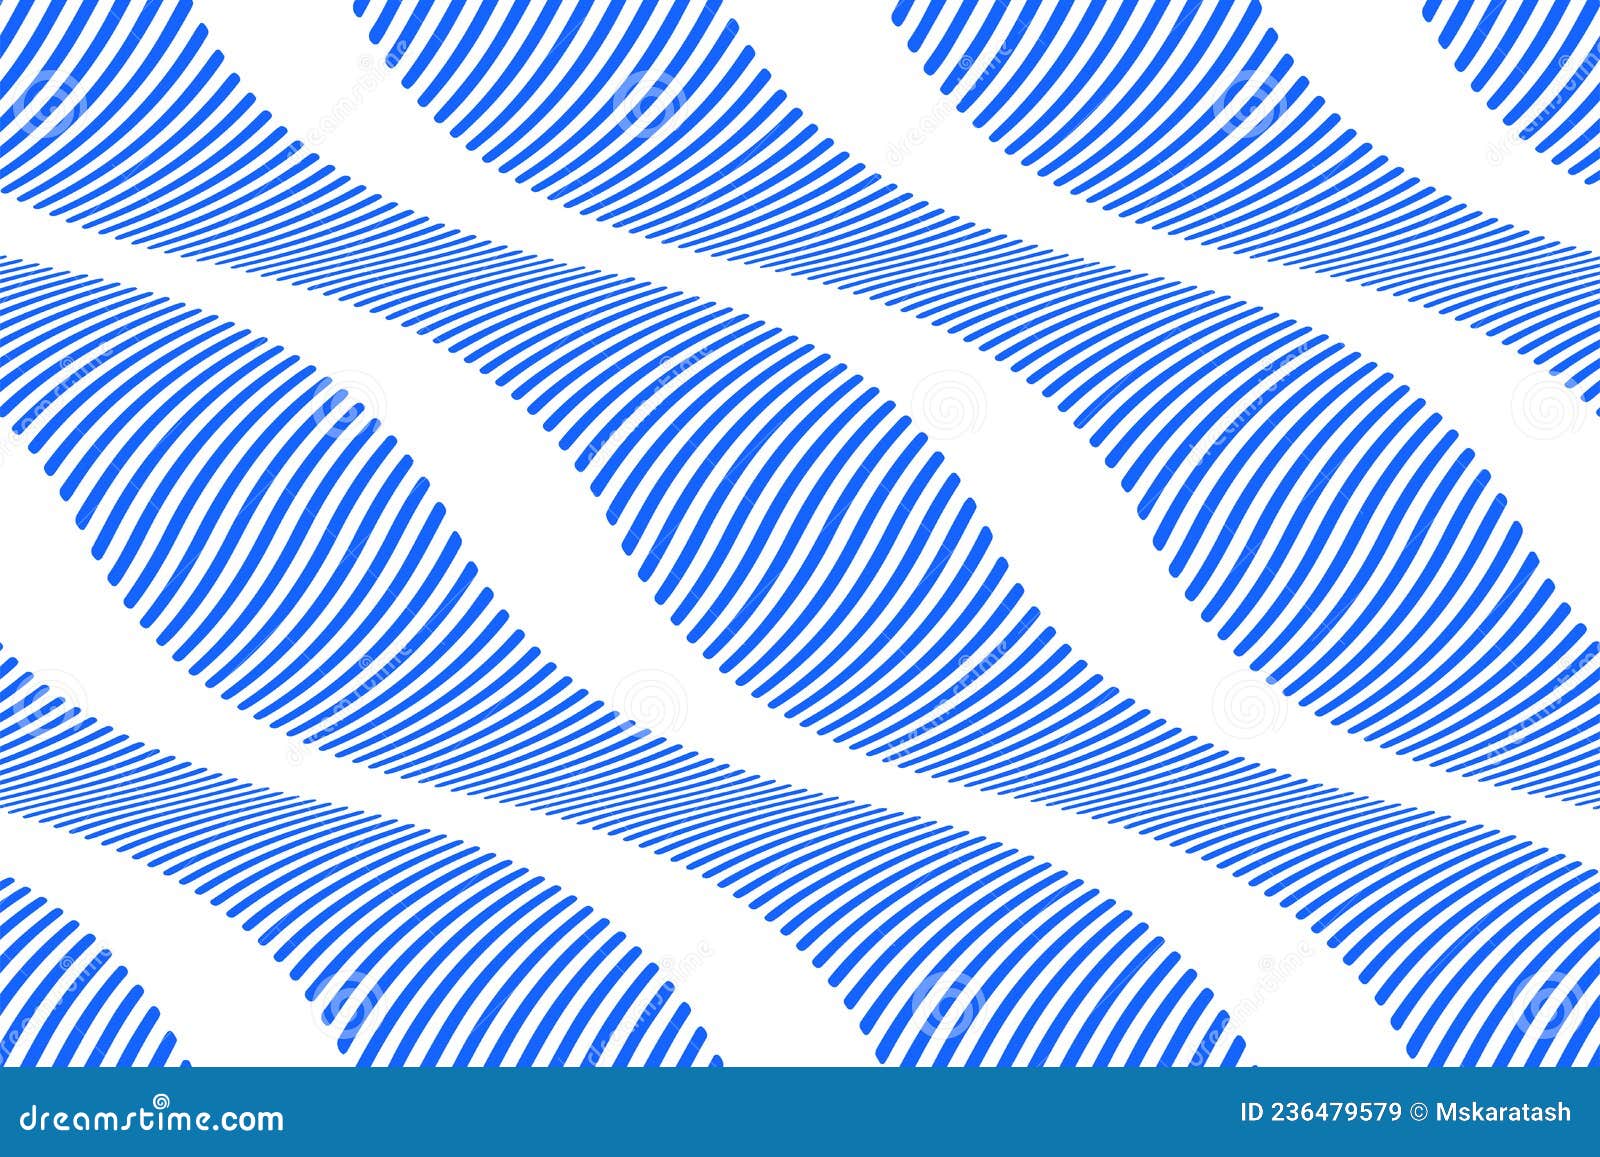 Seamless Background with Waves Lines Vector. Blue Texture with Vertical ...